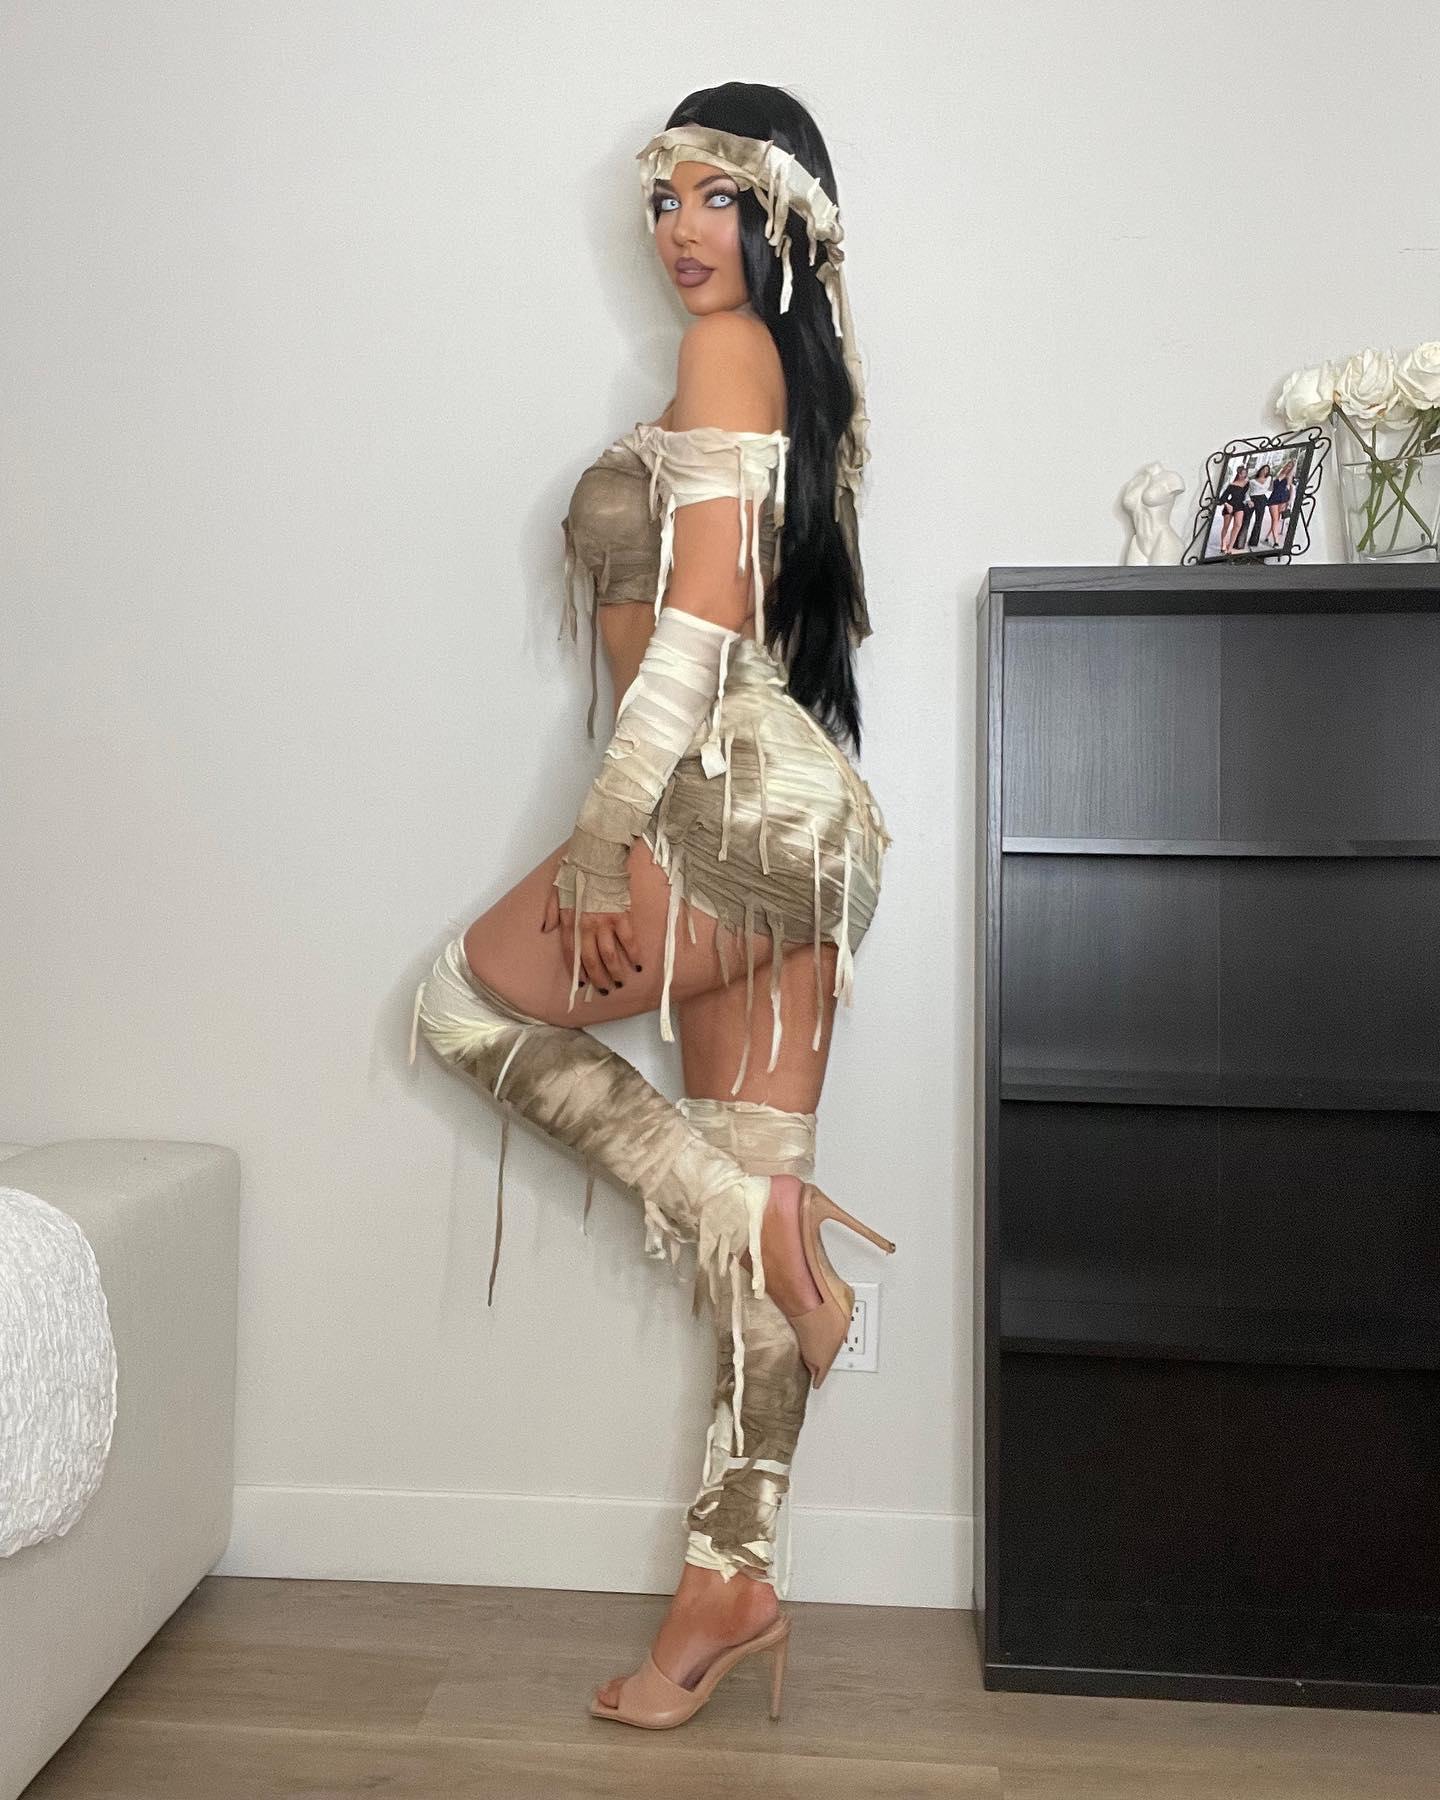 Sophia Pierson went as a mummy for Halloween